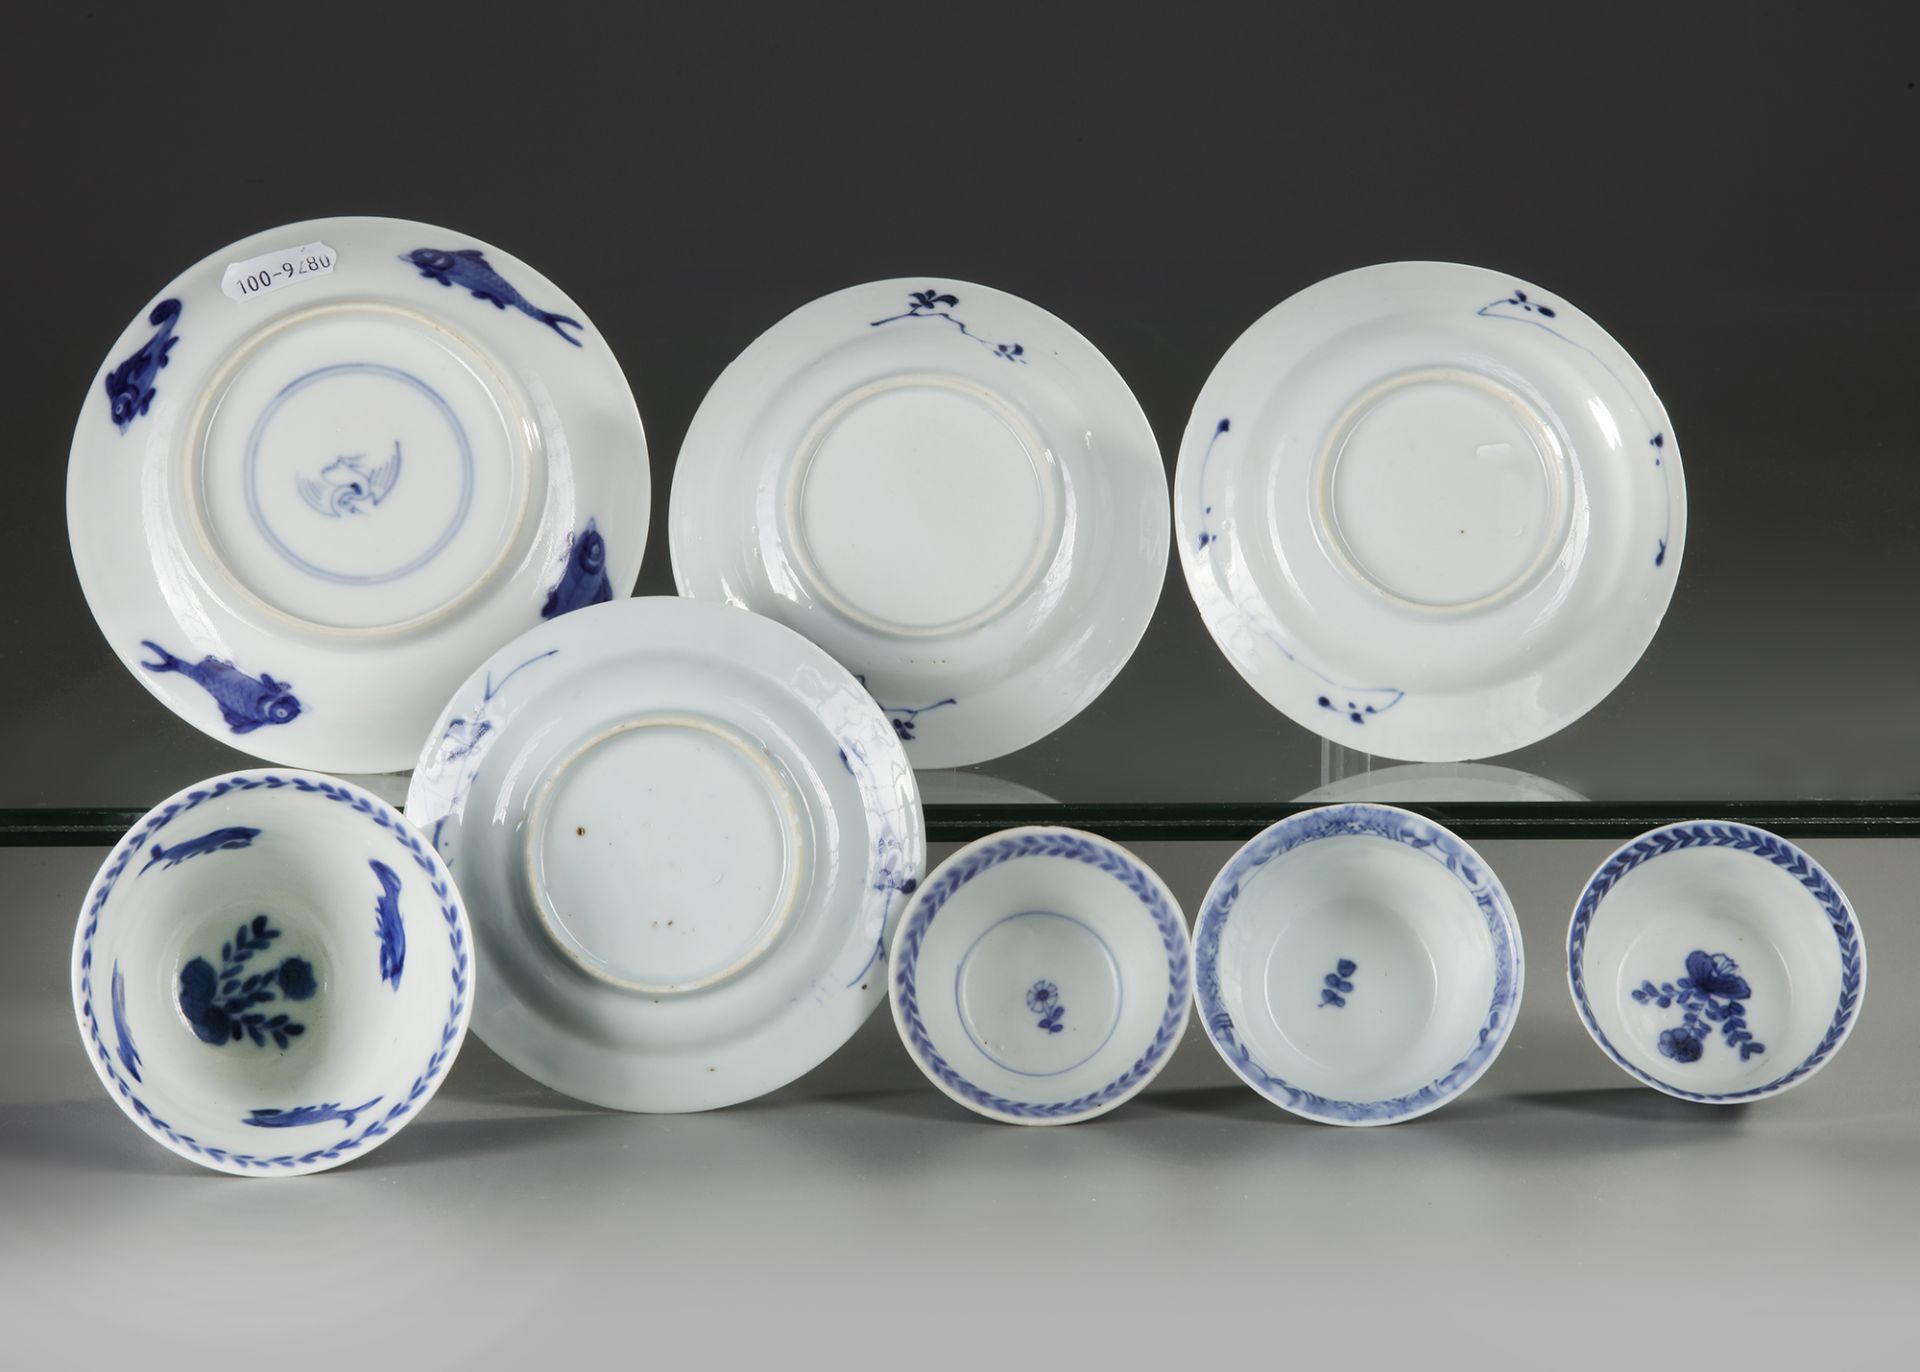 FOUR CHINESE BLUE AND WHITE 'CUCKOO IN THE HOUSE' CUPS AND SAUCERS, 18TH CENTURY - Image 3 of 3